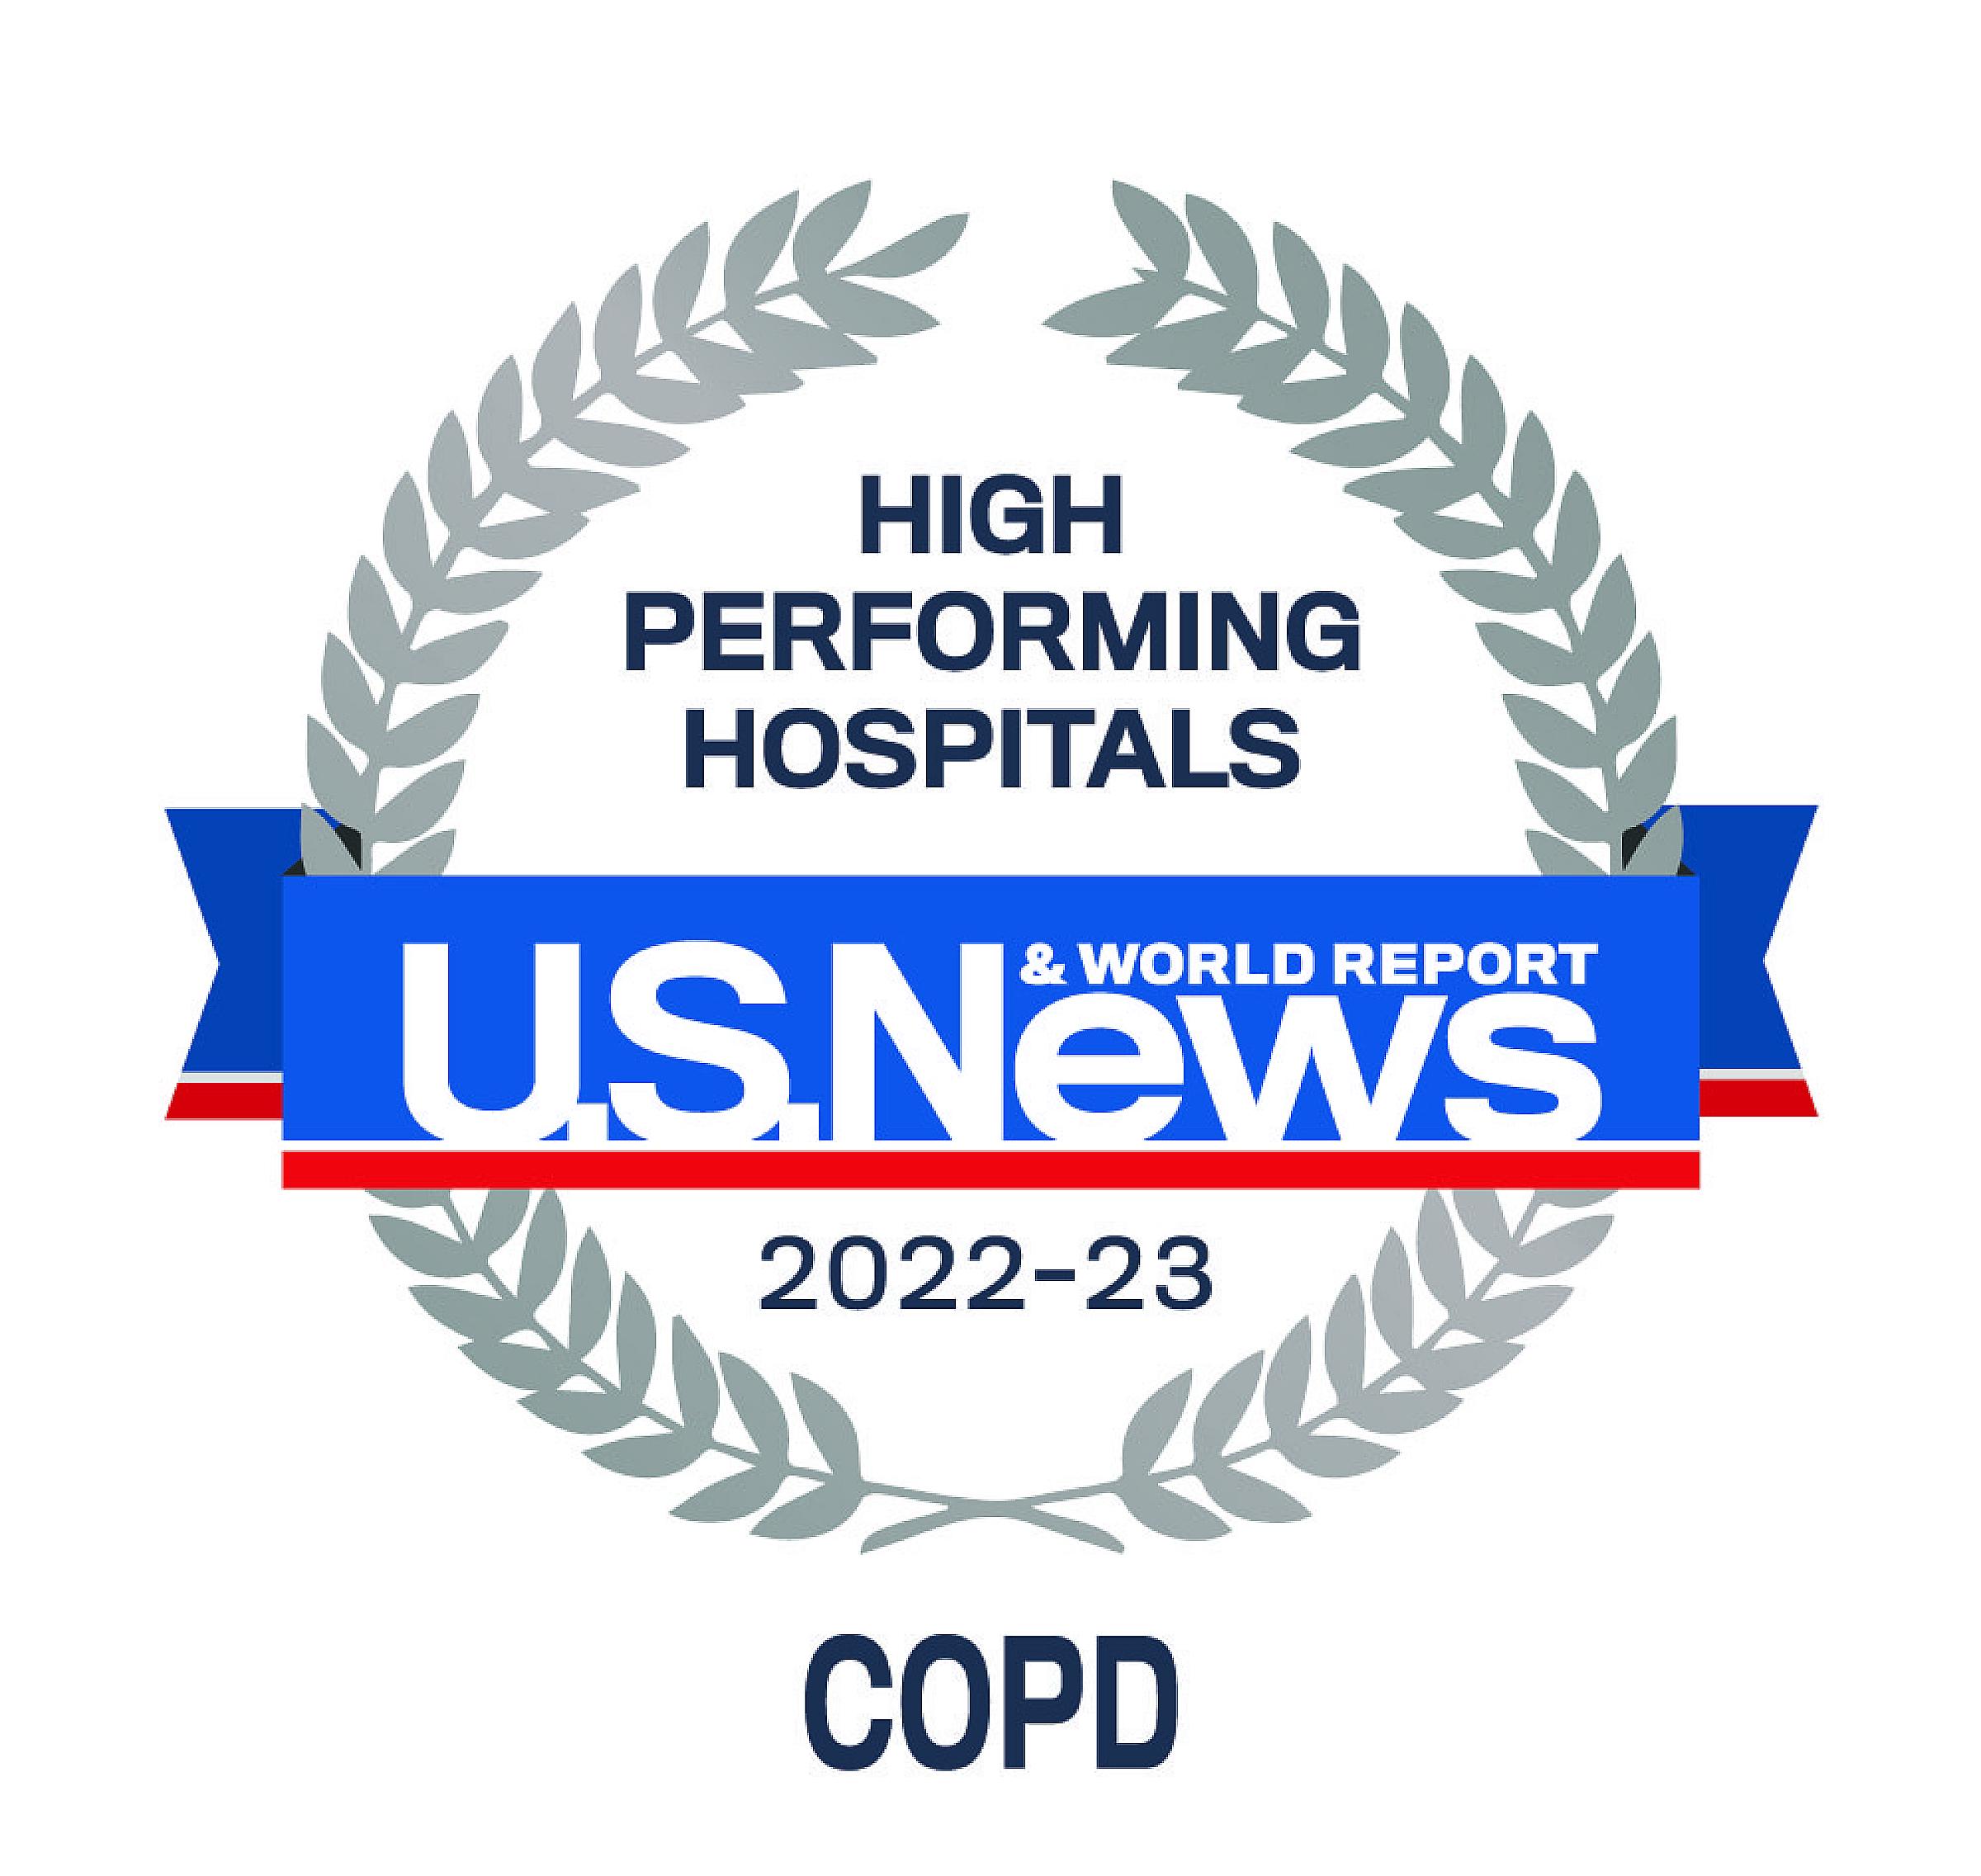 US News 2022-23 High Performing Hospitals COPD Badge